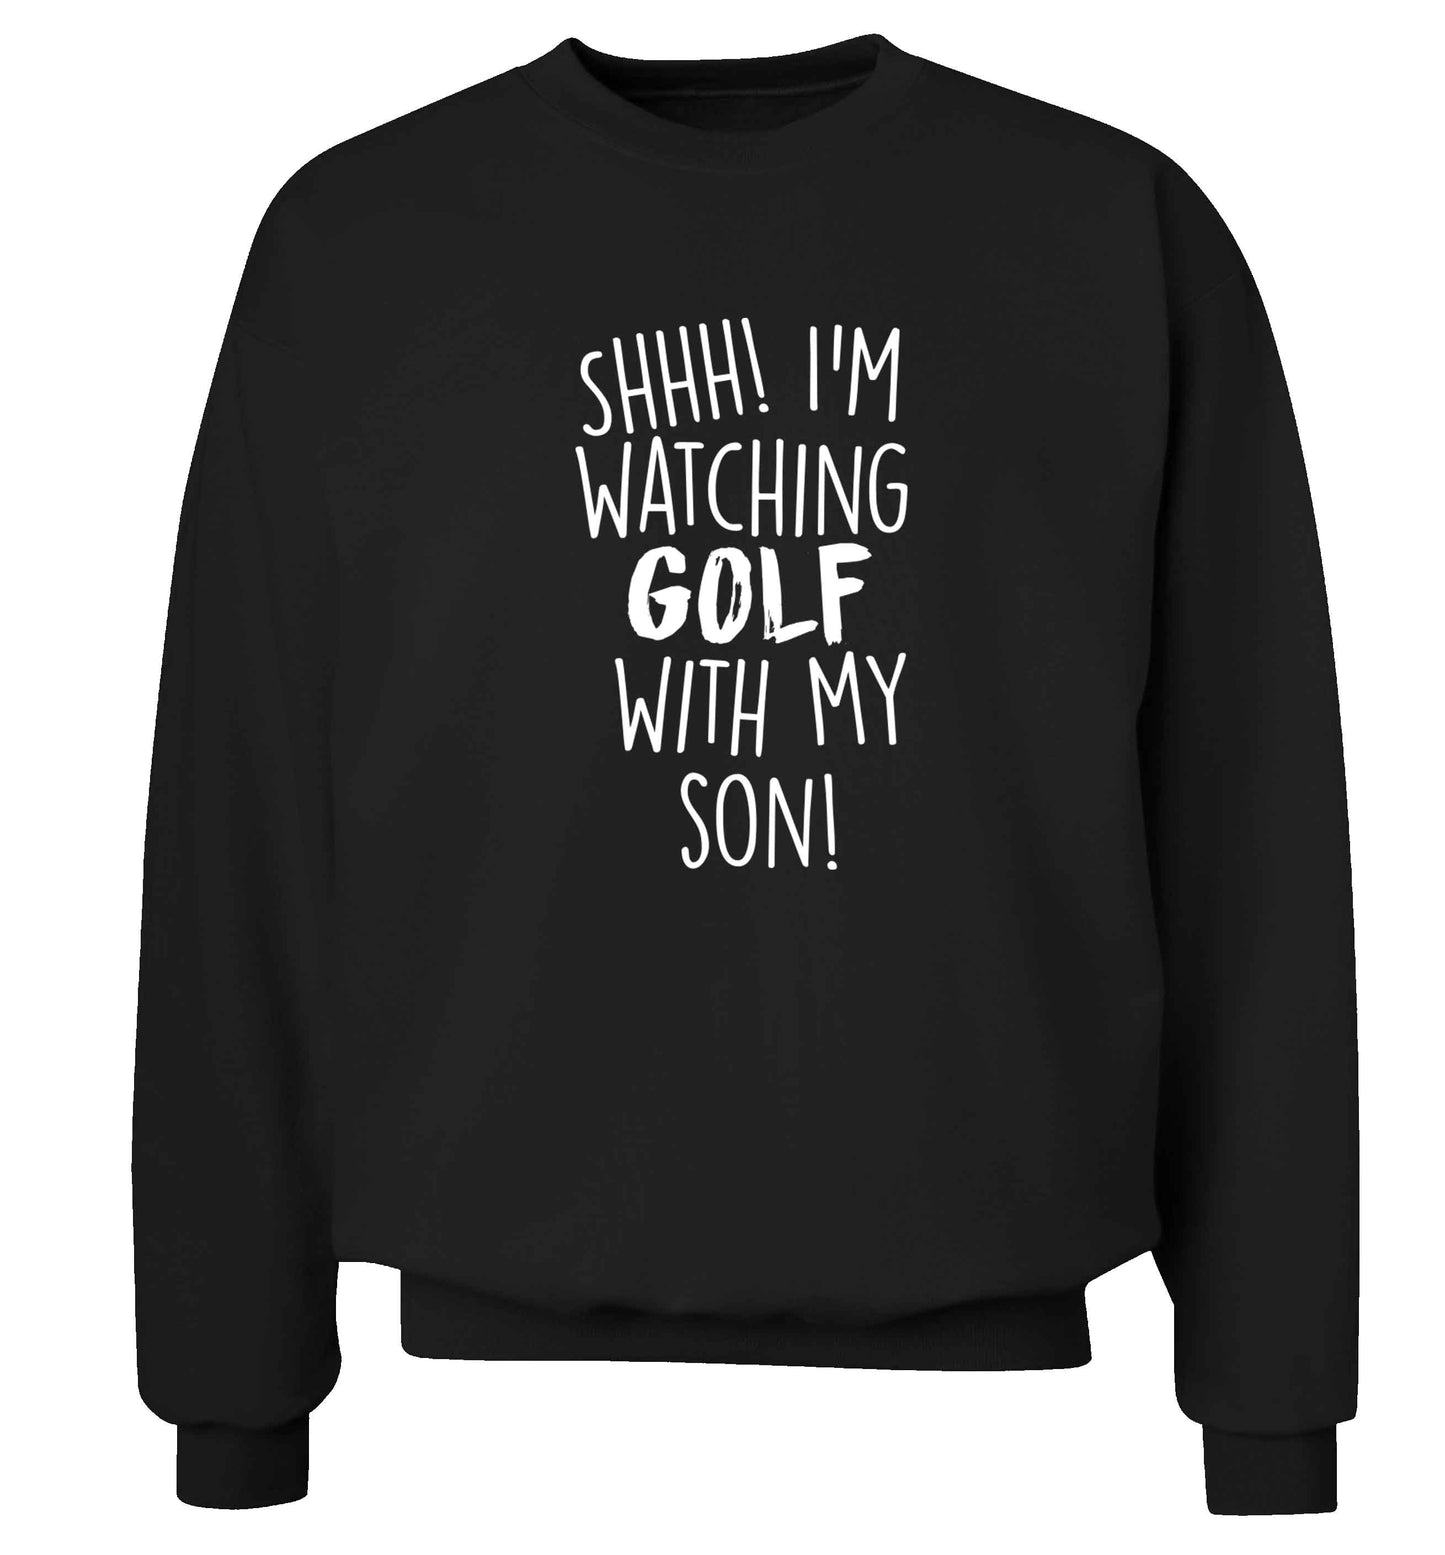 Shh I'm watching golf with my son Adult's unisex black Sweater 2XL